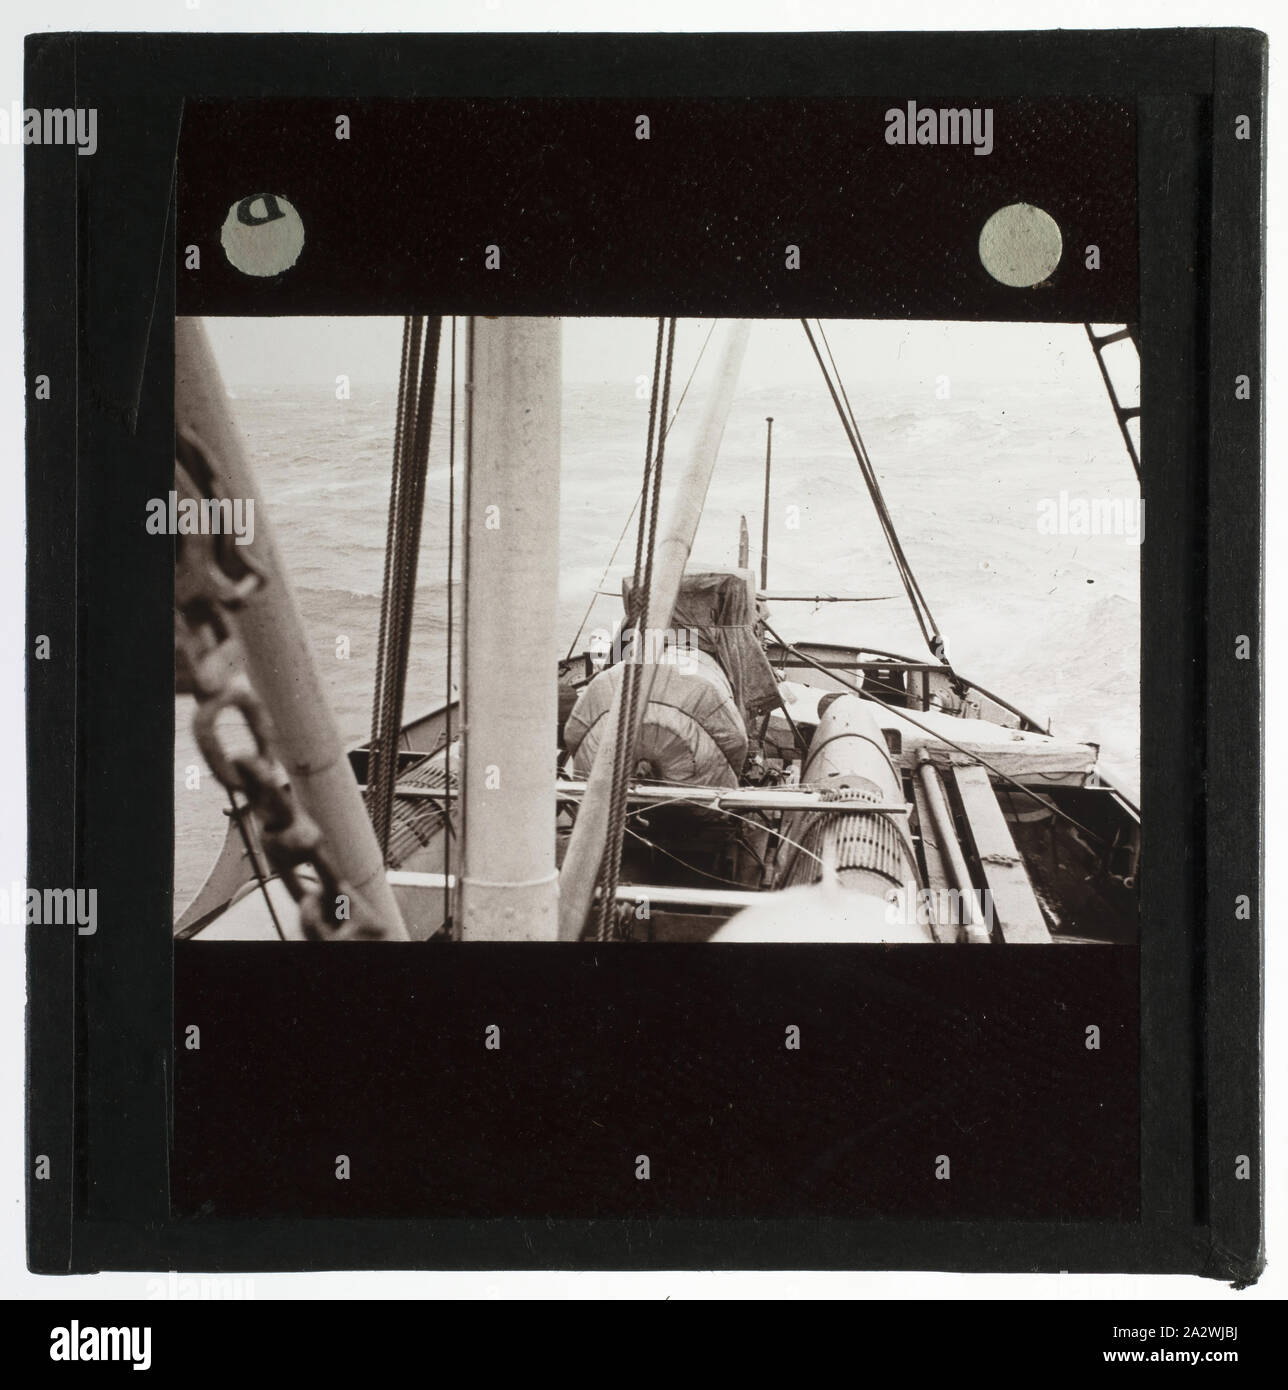 Lantern Slide - RAAF Wapiti A5-37 Stowed at the Stern, Discovery II, Ellsworth Relief Expedition, Antarctica,1936, Lantern slide of RAAF Wapiti A5-37 on the ship Discovery II, Antarctica. One of 328 images in various formats including artworks, photographs, glass negatives and lantern slides Stock Photo